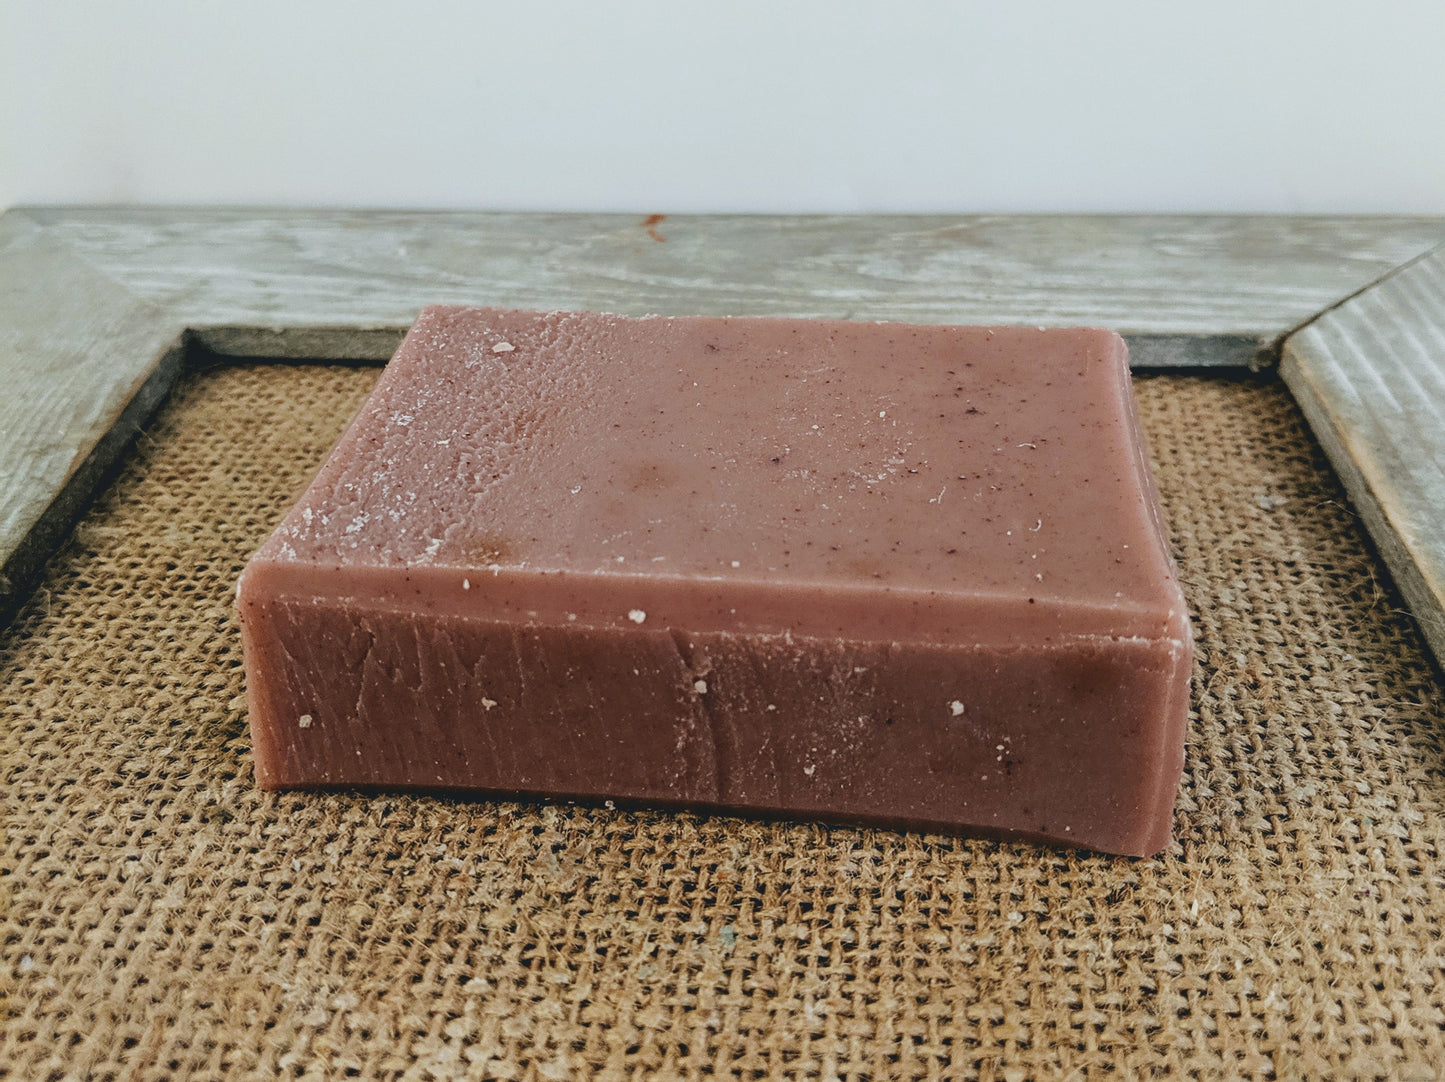 French Lavender and Red Clay Soap - Hanna Herbals